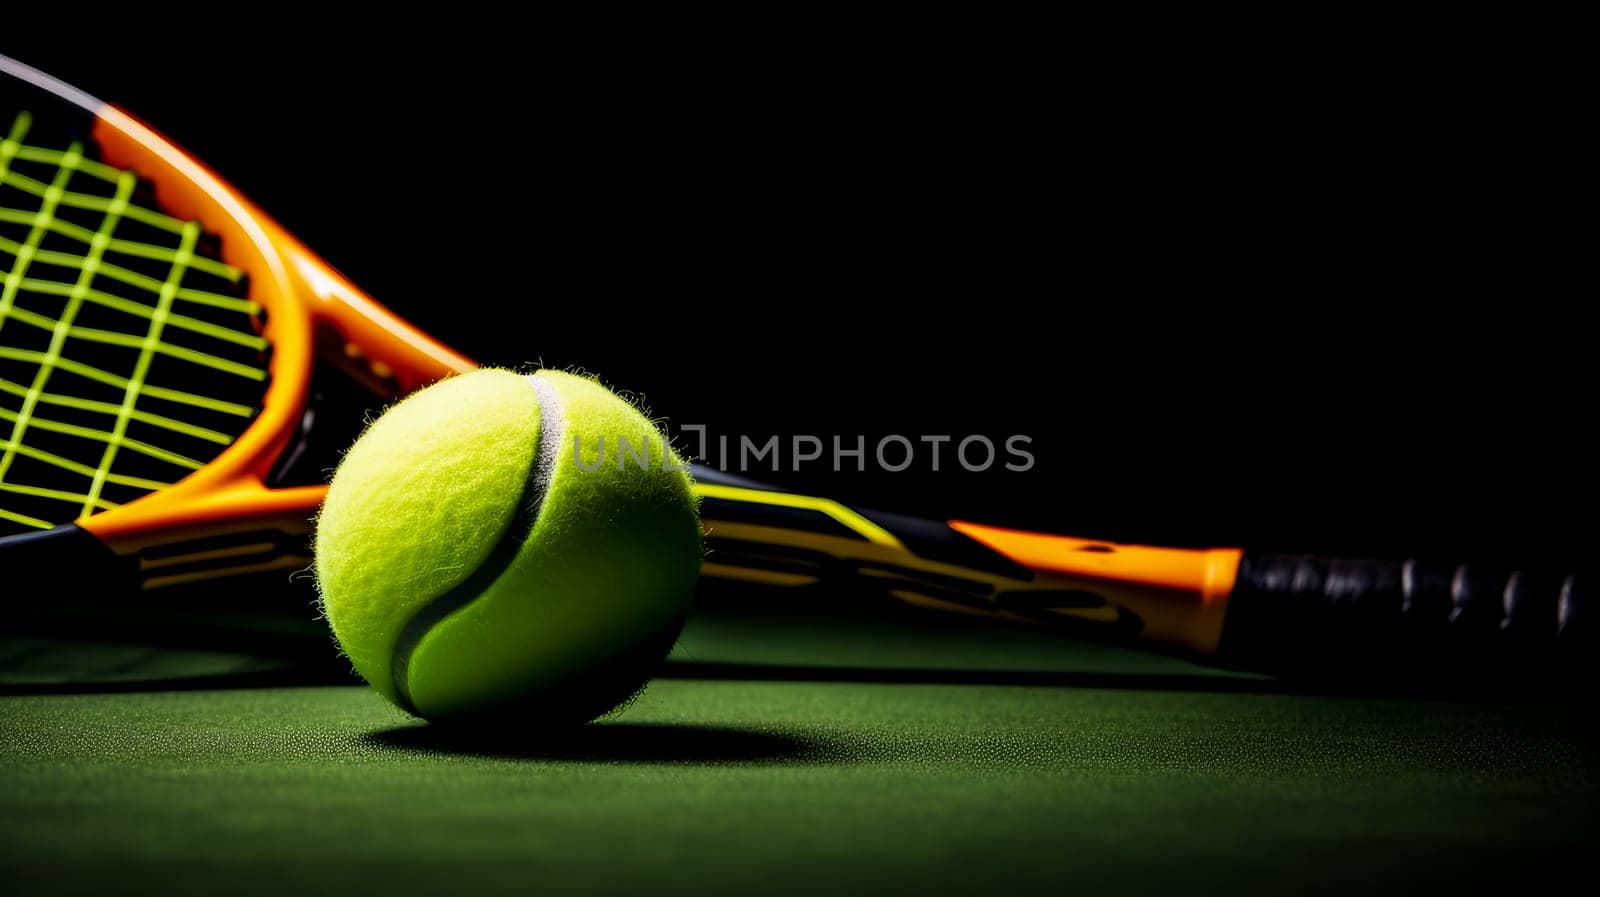 Sport background design dark tone. Closeup tennis ball and racket on line point on clay court. Playing sports, healthy lifestyle, physical activity, training, active lifestyle, competition, Preparation for big sports.